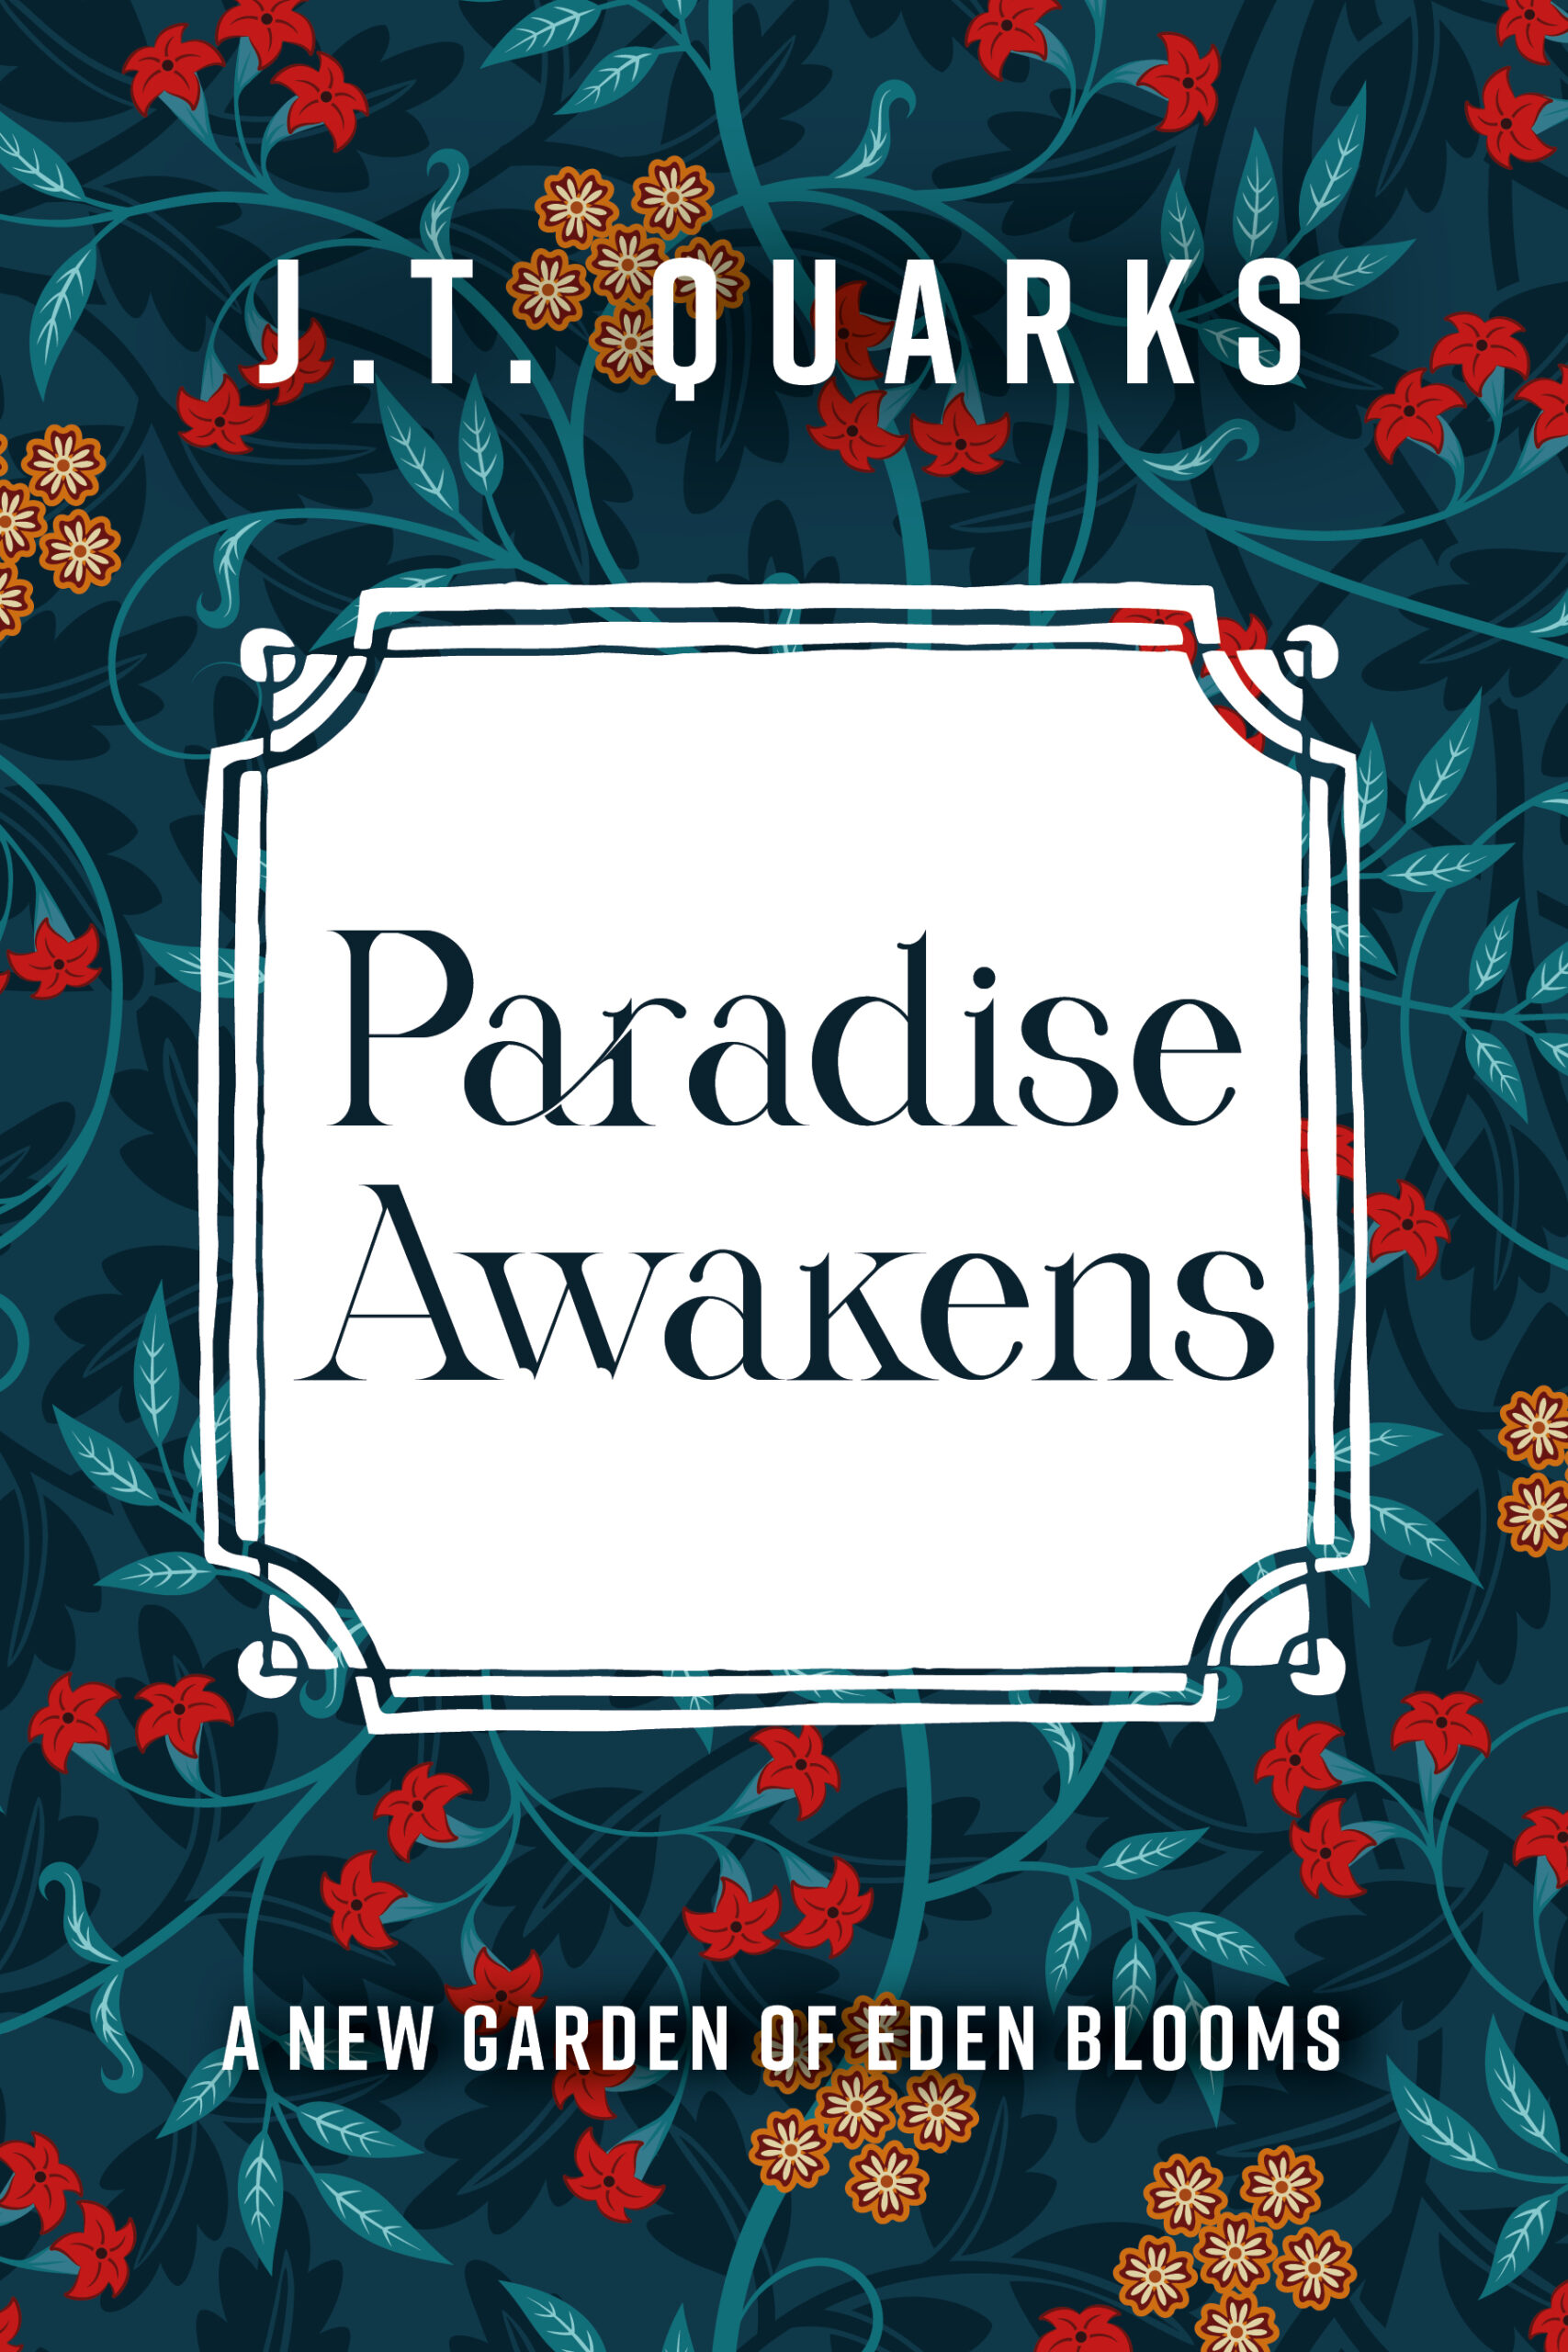 FREE: Paradise Awakens: A New Garden of Eden Blooms by J.T. Quarks